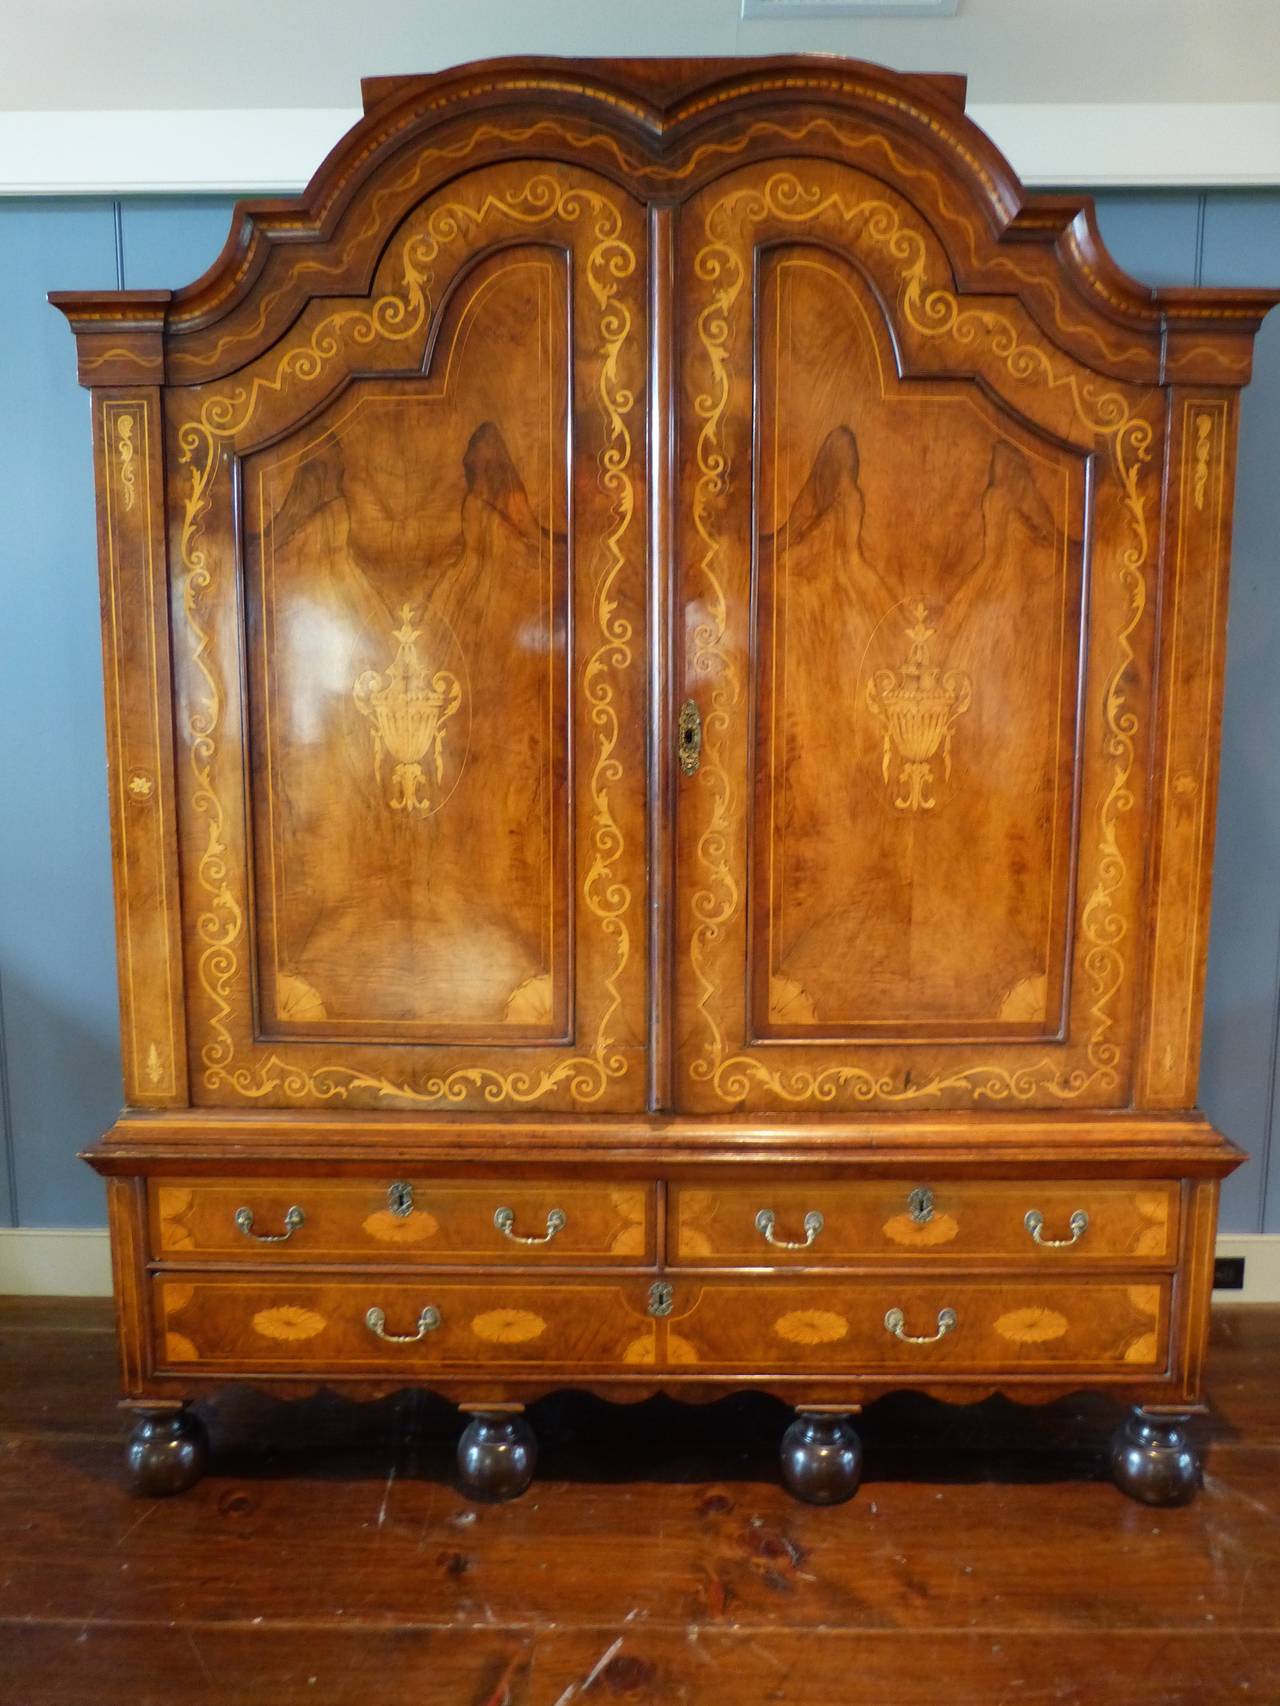 A fine Circassian walnut and oak Dutch, early 18th century kast. The double doors inlaid with neoclassical vases, surrounded by interloping vines, on a base with two short and one long drawer all resting on wavy apron and four bun feet. The interior